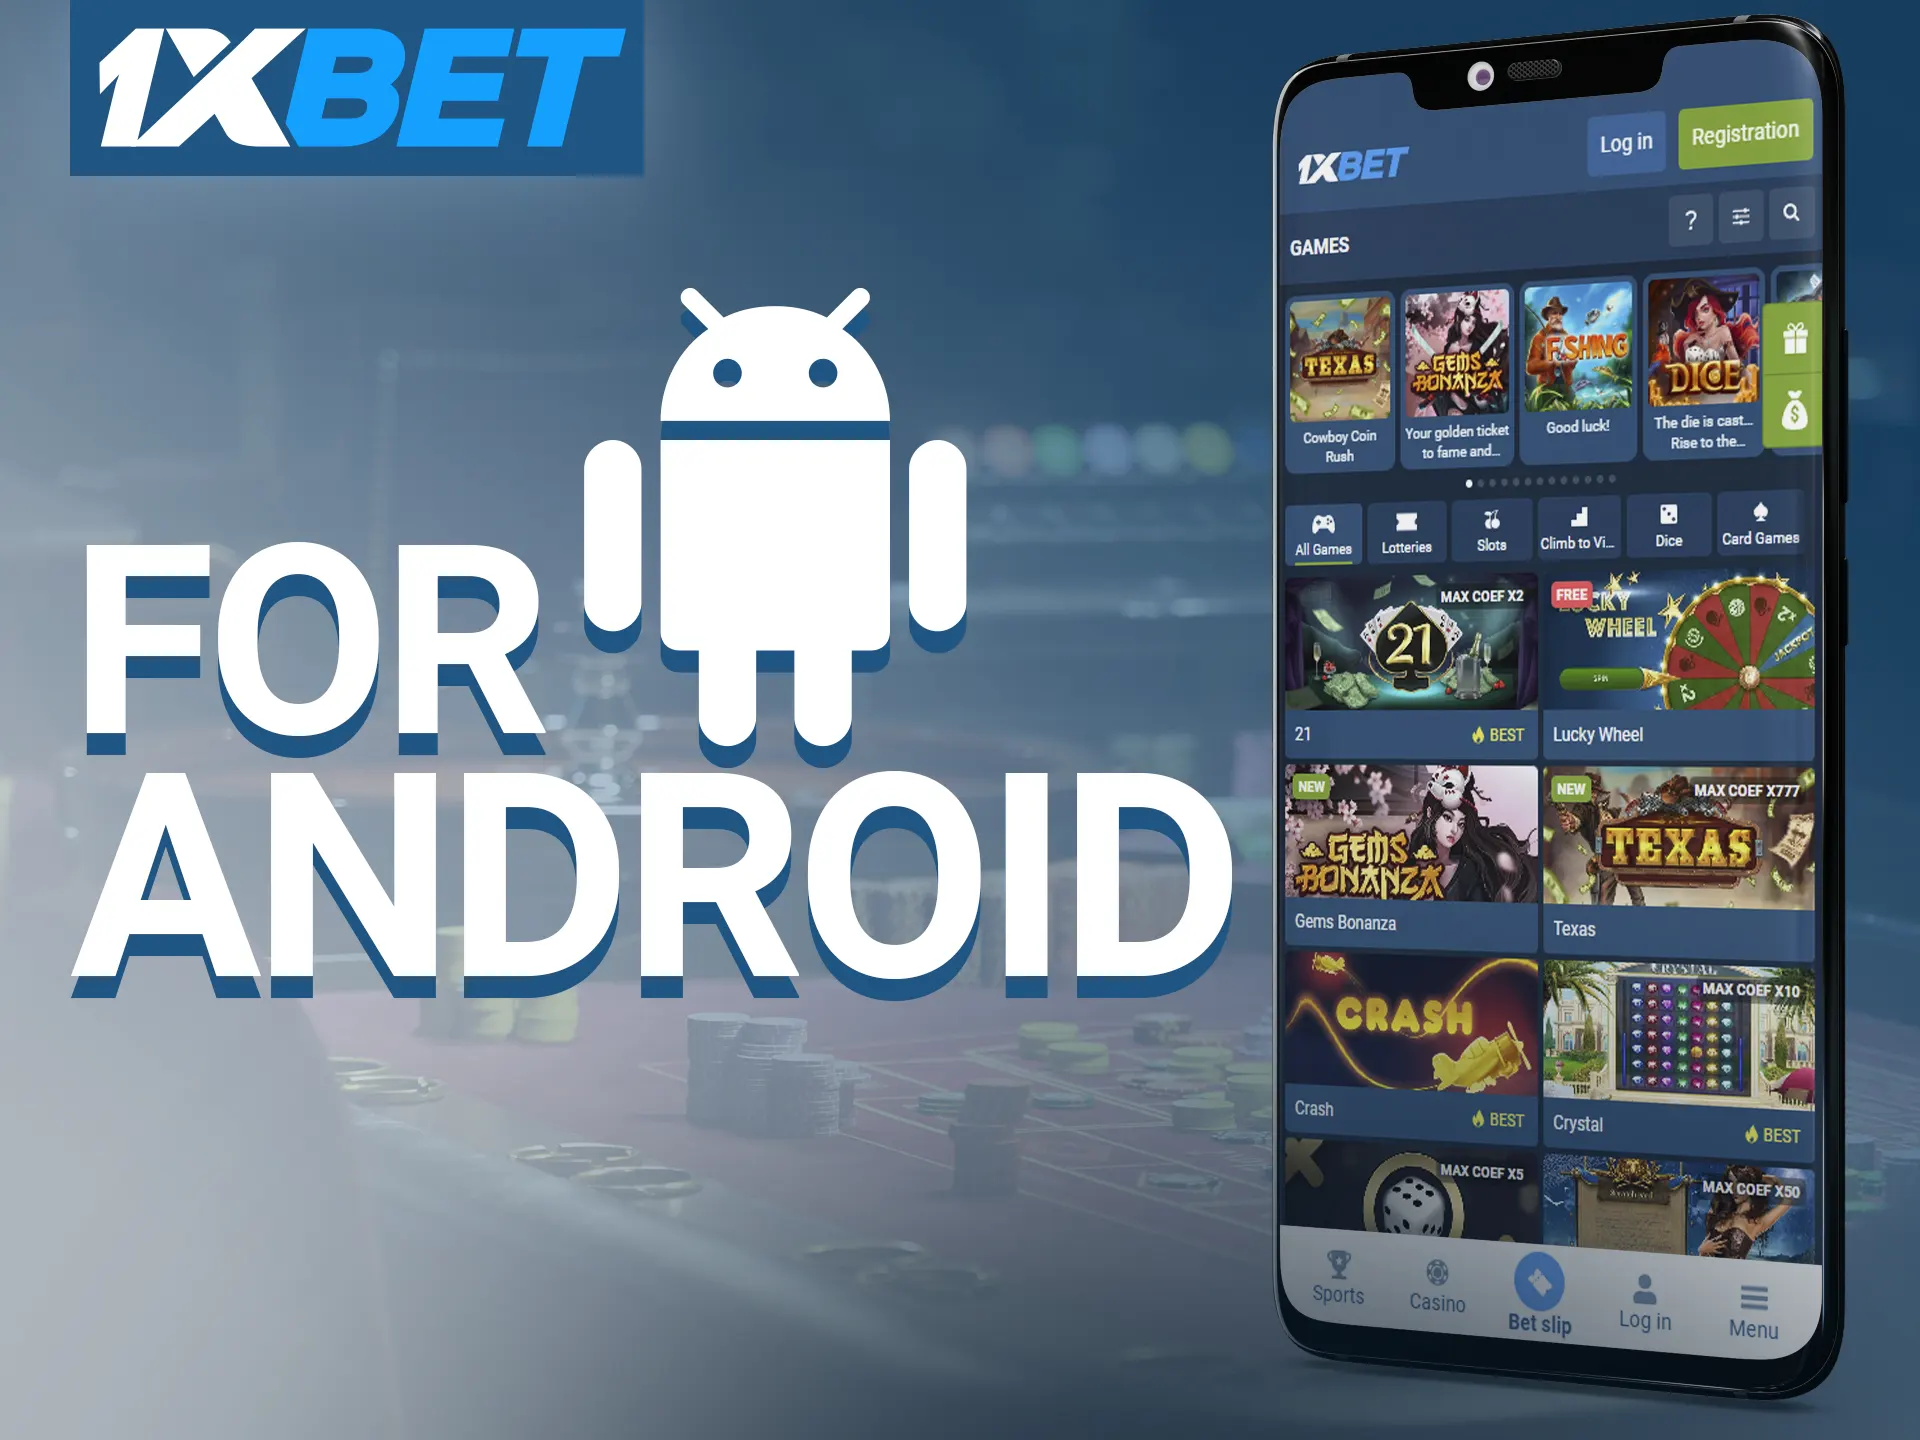 Install the 1xbet app on your Android device.